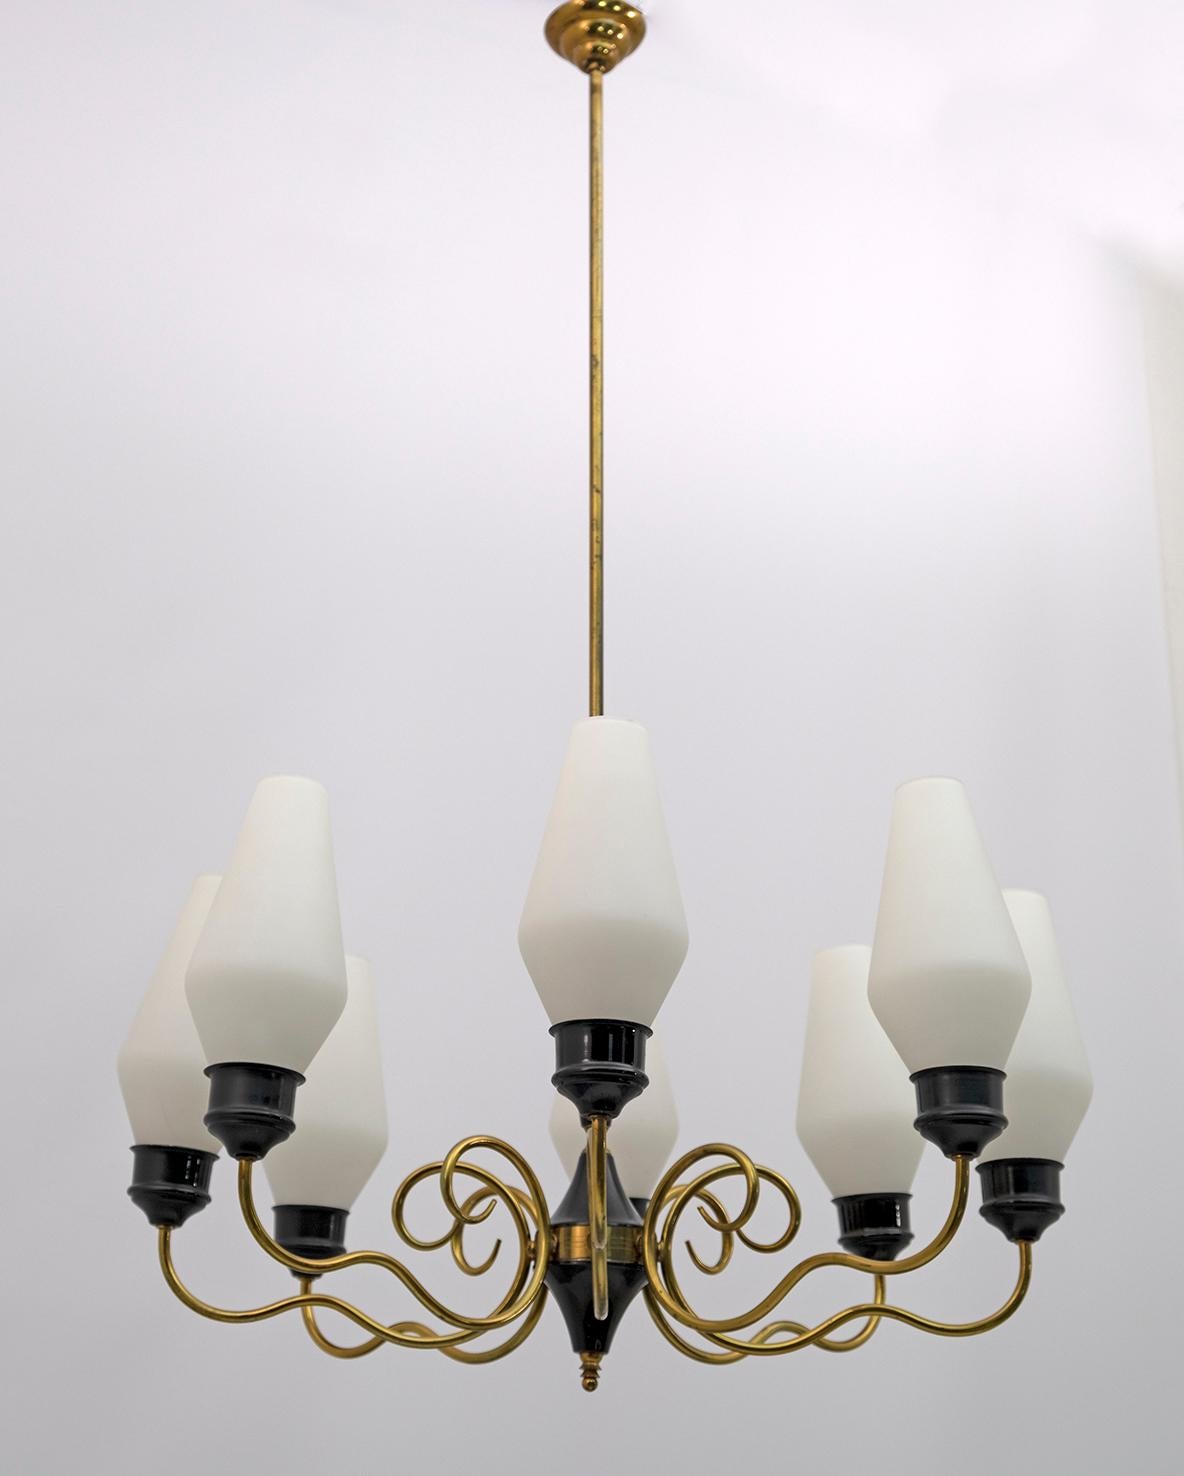 This 8-light chandelier in brass, aluminum and satin glass, was produced in the 1950s, in Stilnovo style.